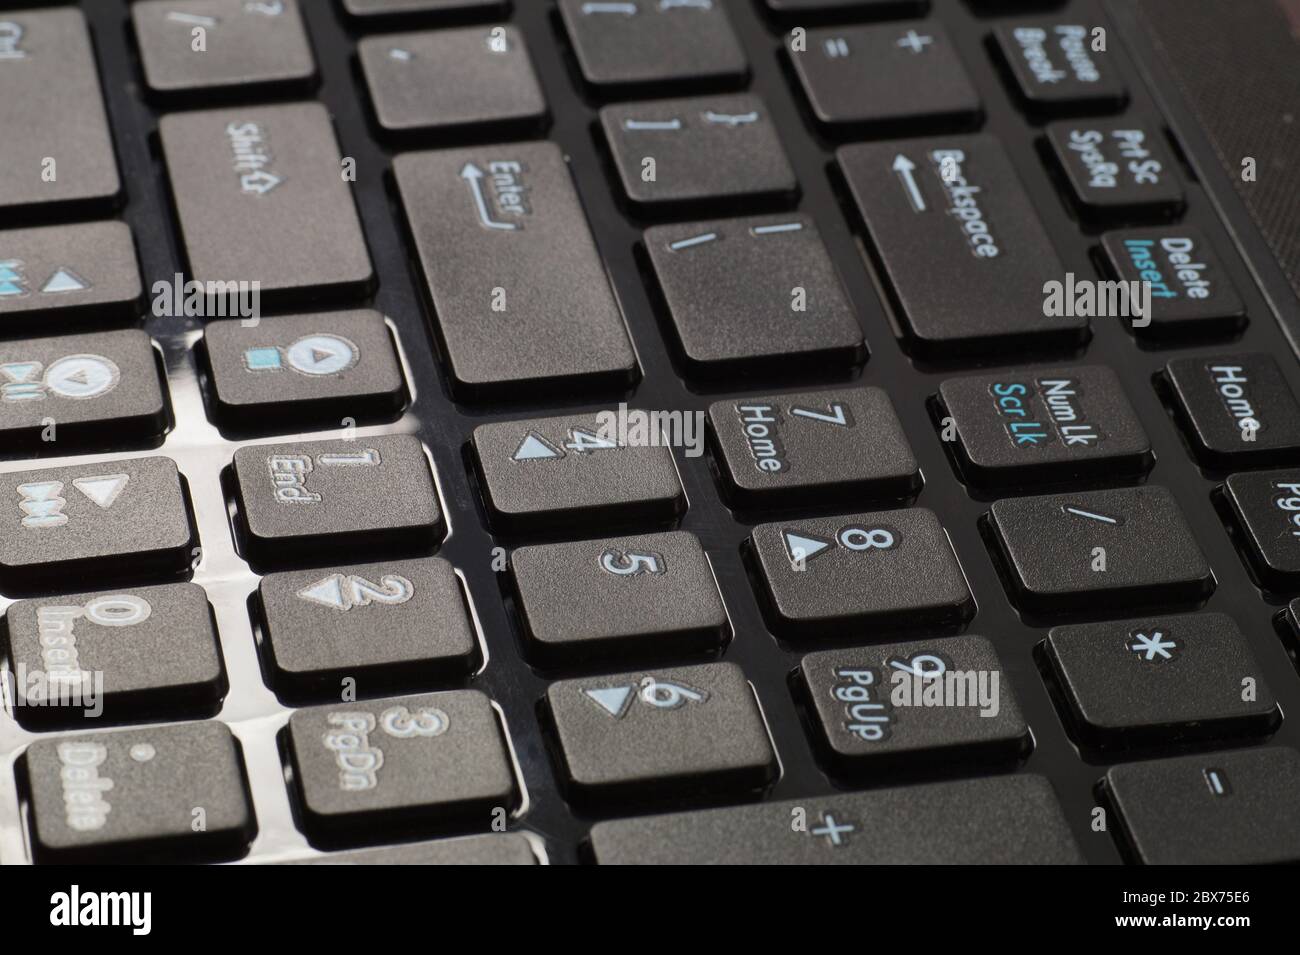 Laptop. Close-up on the numeric keypad of a new laptop. Stock Photo